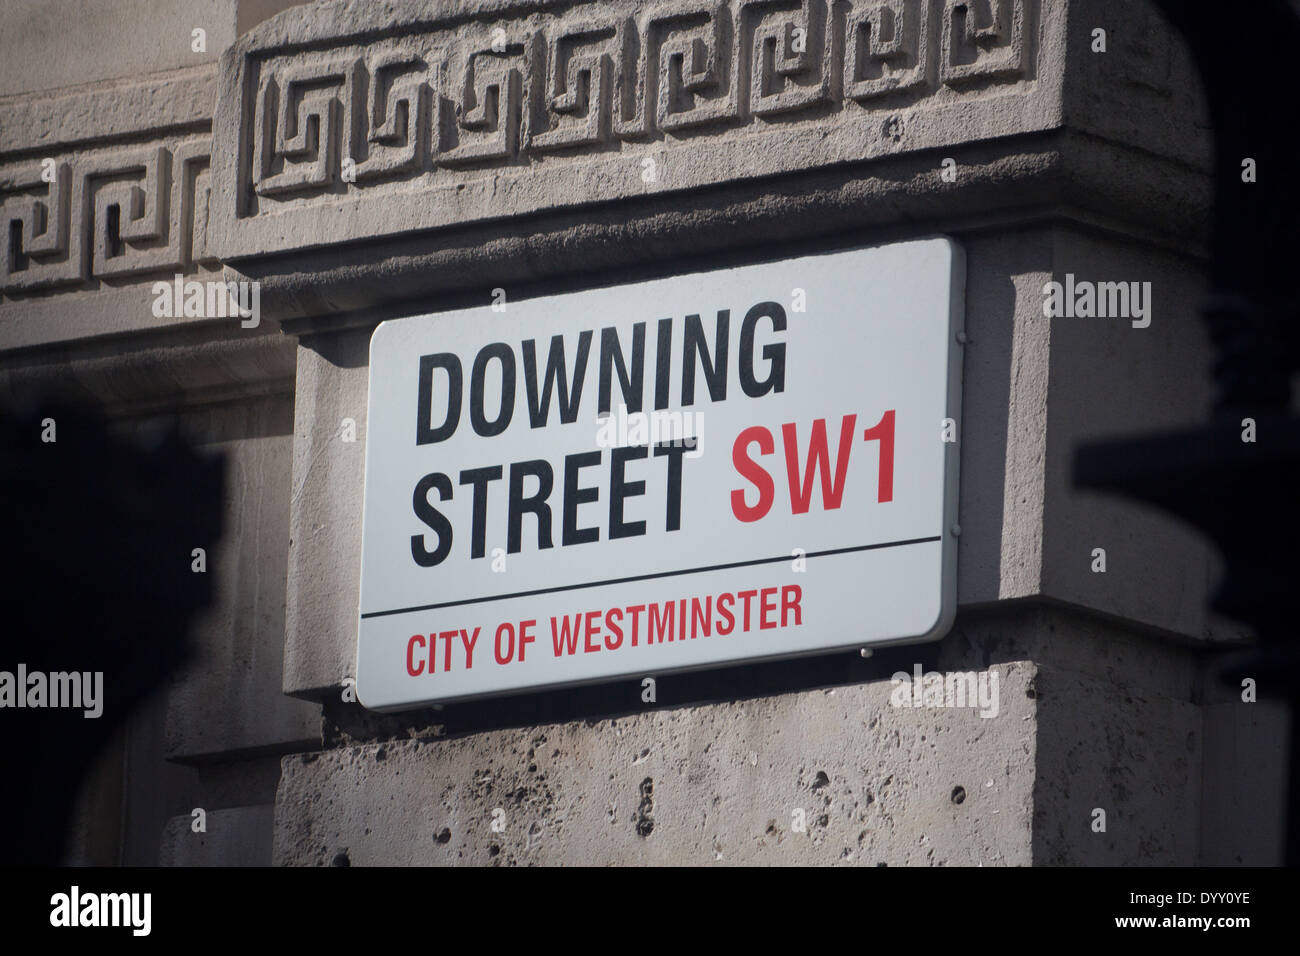 Downing Street Downing St SW1 segno City of Westminster Londra Inghilterra REGNO UNITO Foto Stock